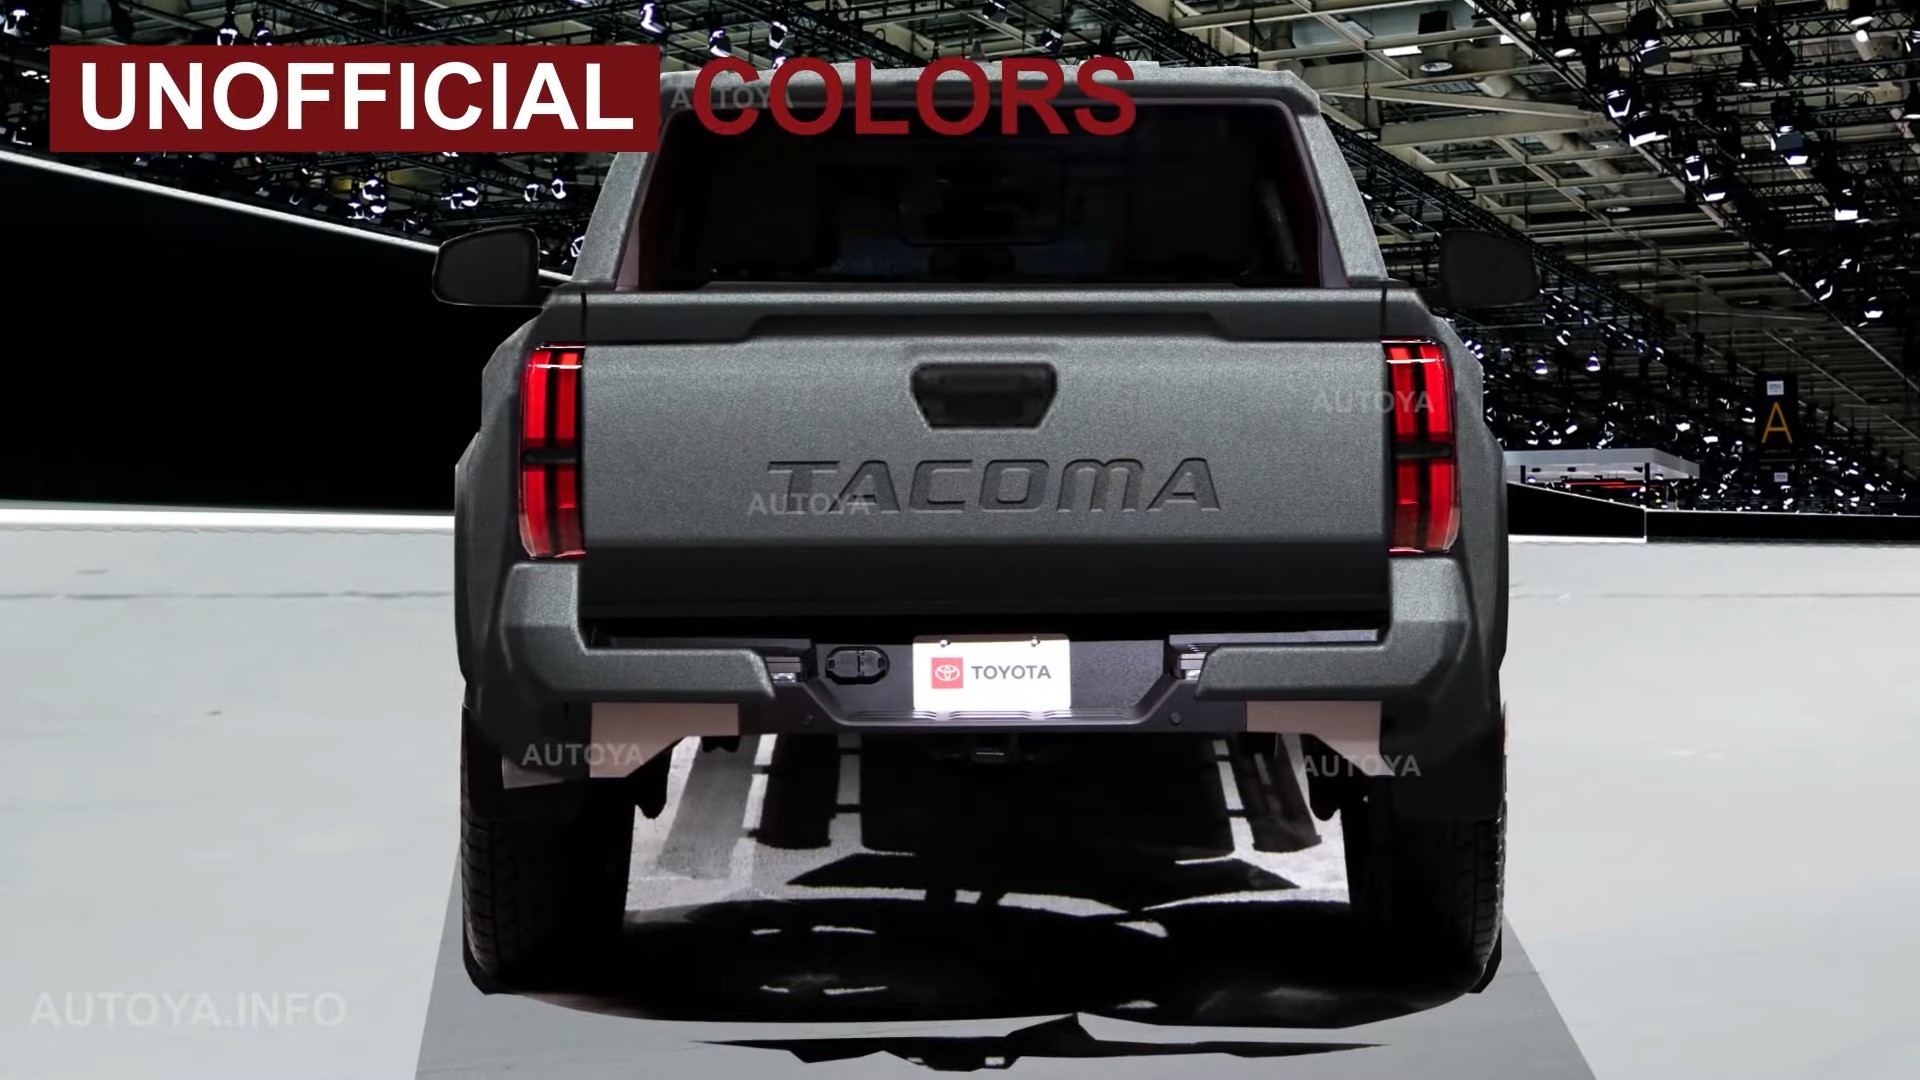 2024 Tacoma 2024 Tacoma TRD Colors Previewed Via CGI Renderings 2024-toyota-tacoma-trd-brandishes-all-juicy-color-options-albeit-only-in-cgi_15